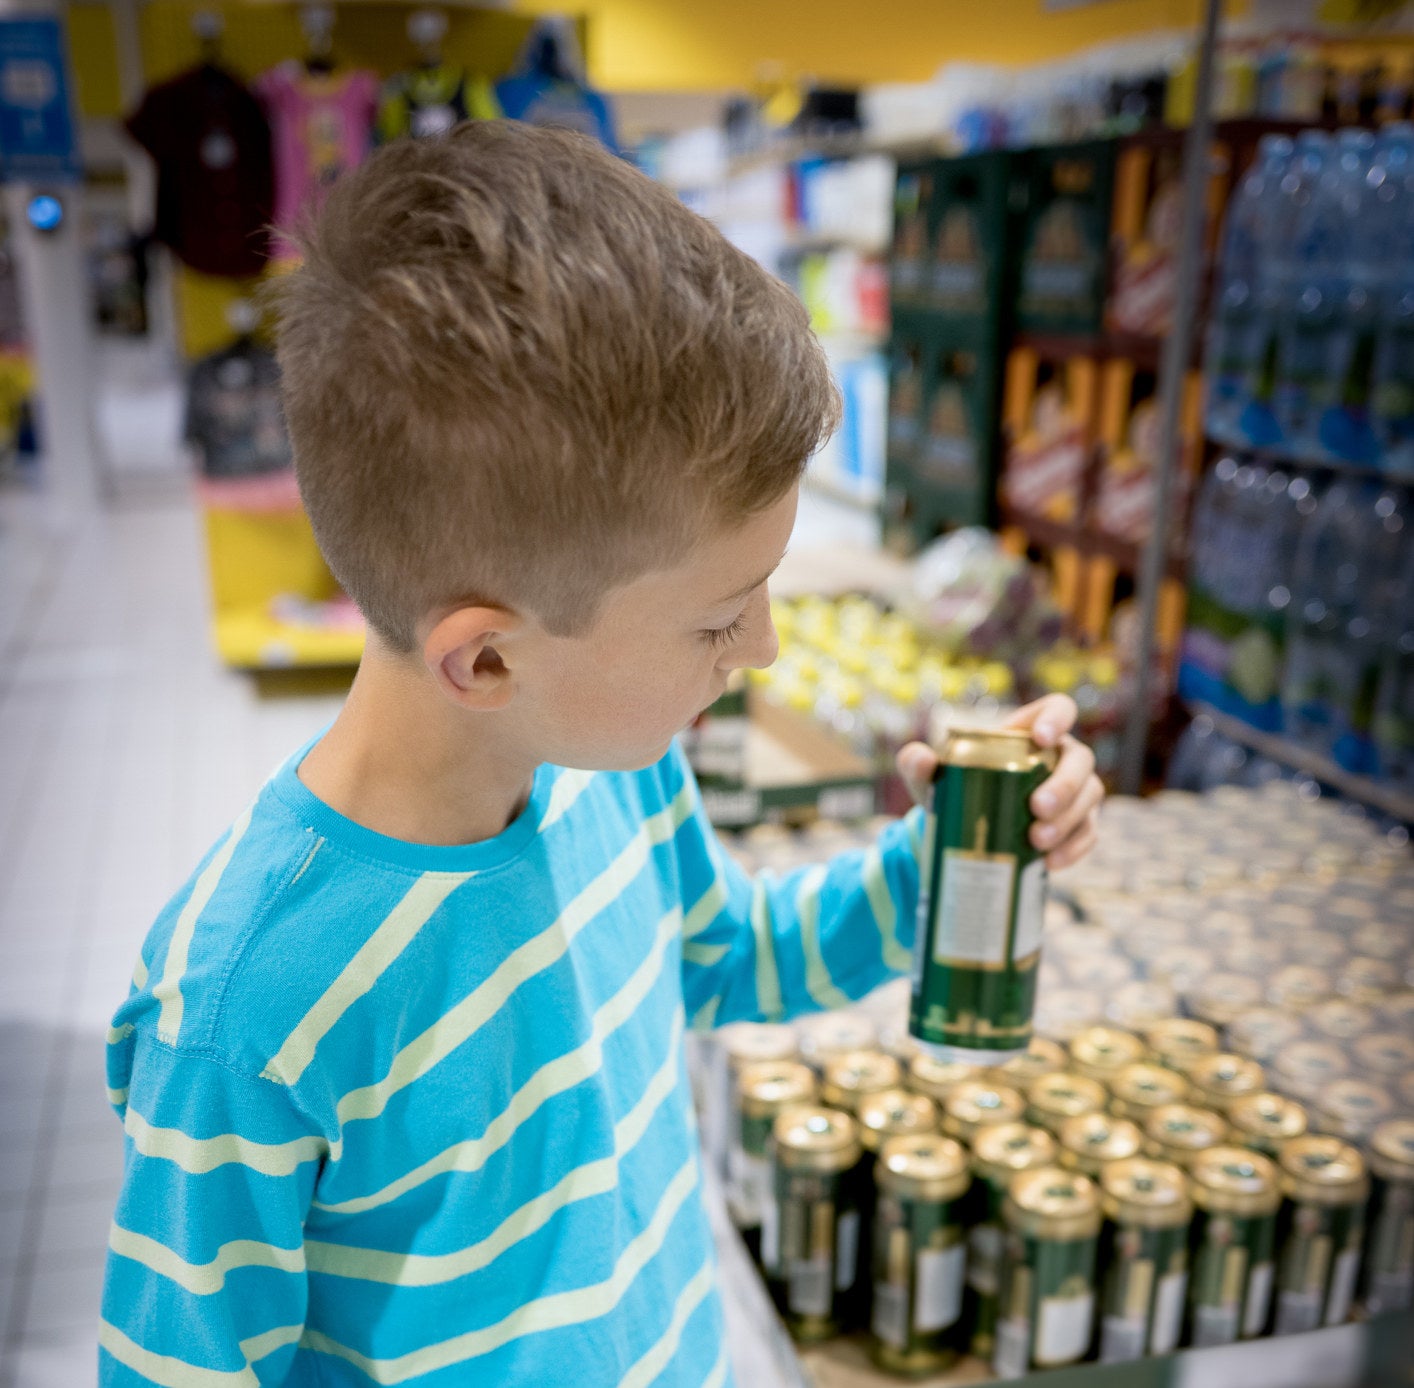 A child holding a beverage can in a store